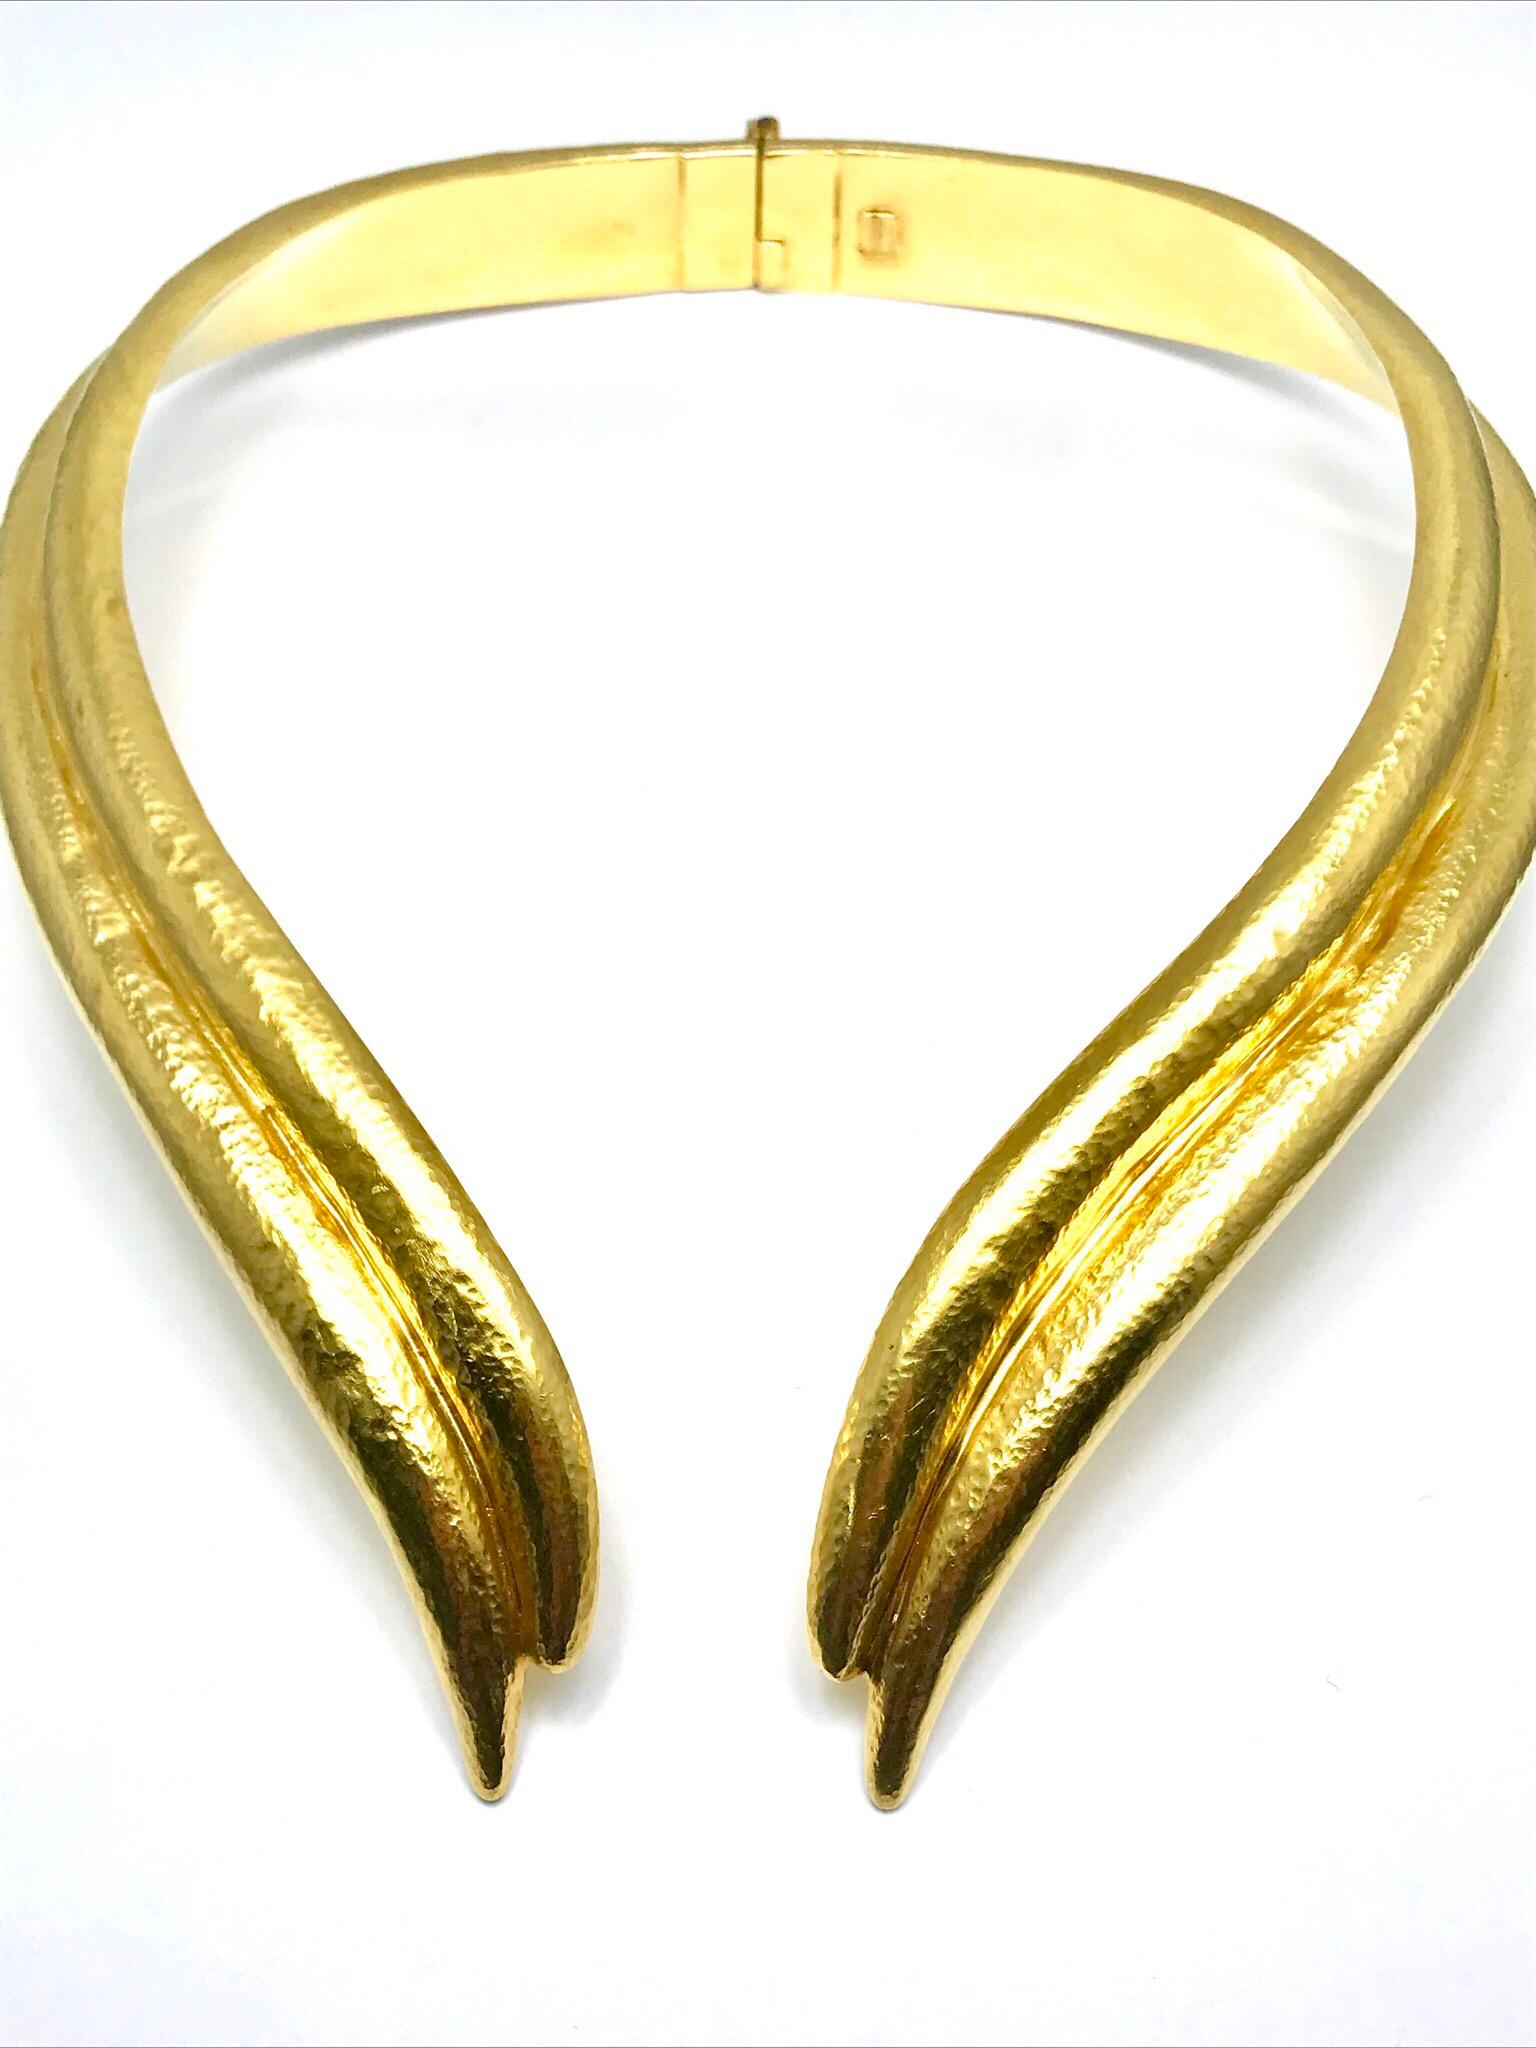 This is a beautifully handcrafted Zolotas 22 karat flexible hinged collar necklace in it's original necklace folder.  The necklace features a hammered, polished finish with a spring loaded hinge, and an open front, for ease of putting on and taking